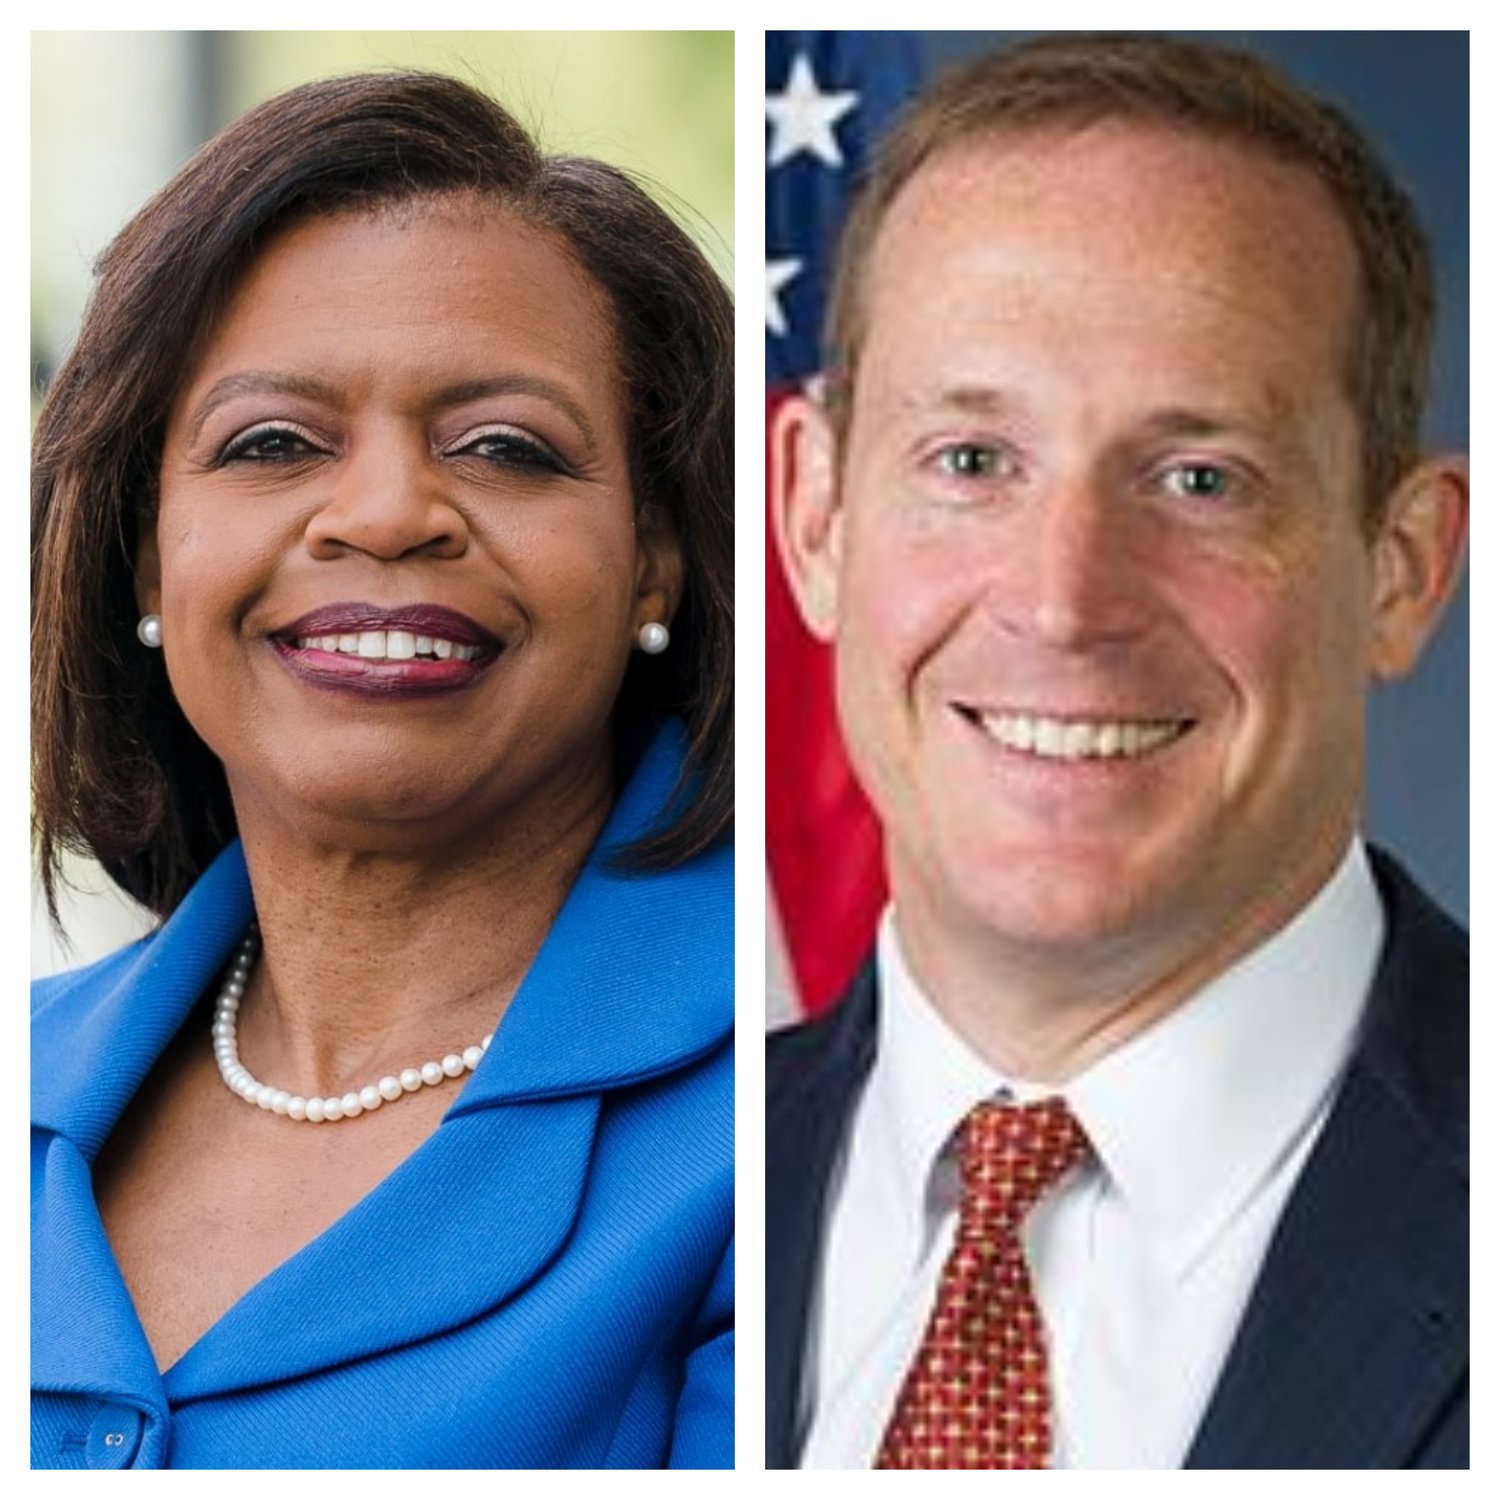 Democrat Cheri Beasley and Republican Ted Budd are in a close race for a U.S. Senate seat representing North Carolina. Election Day is Nov. 8.